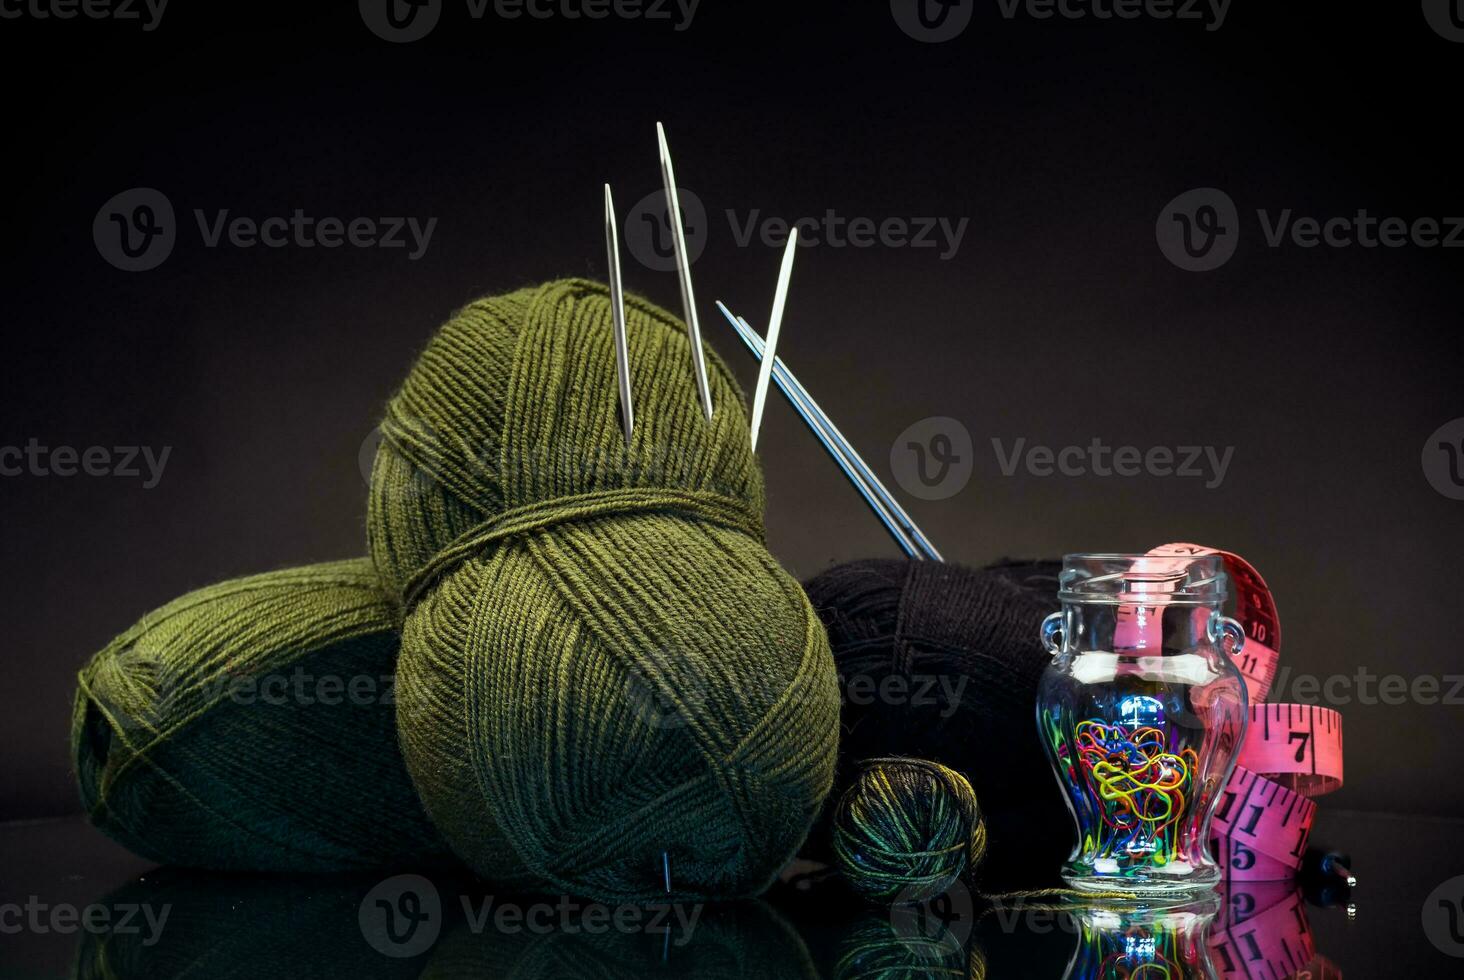 wool yarn, knitting needles and other tools for hand knitting. photo